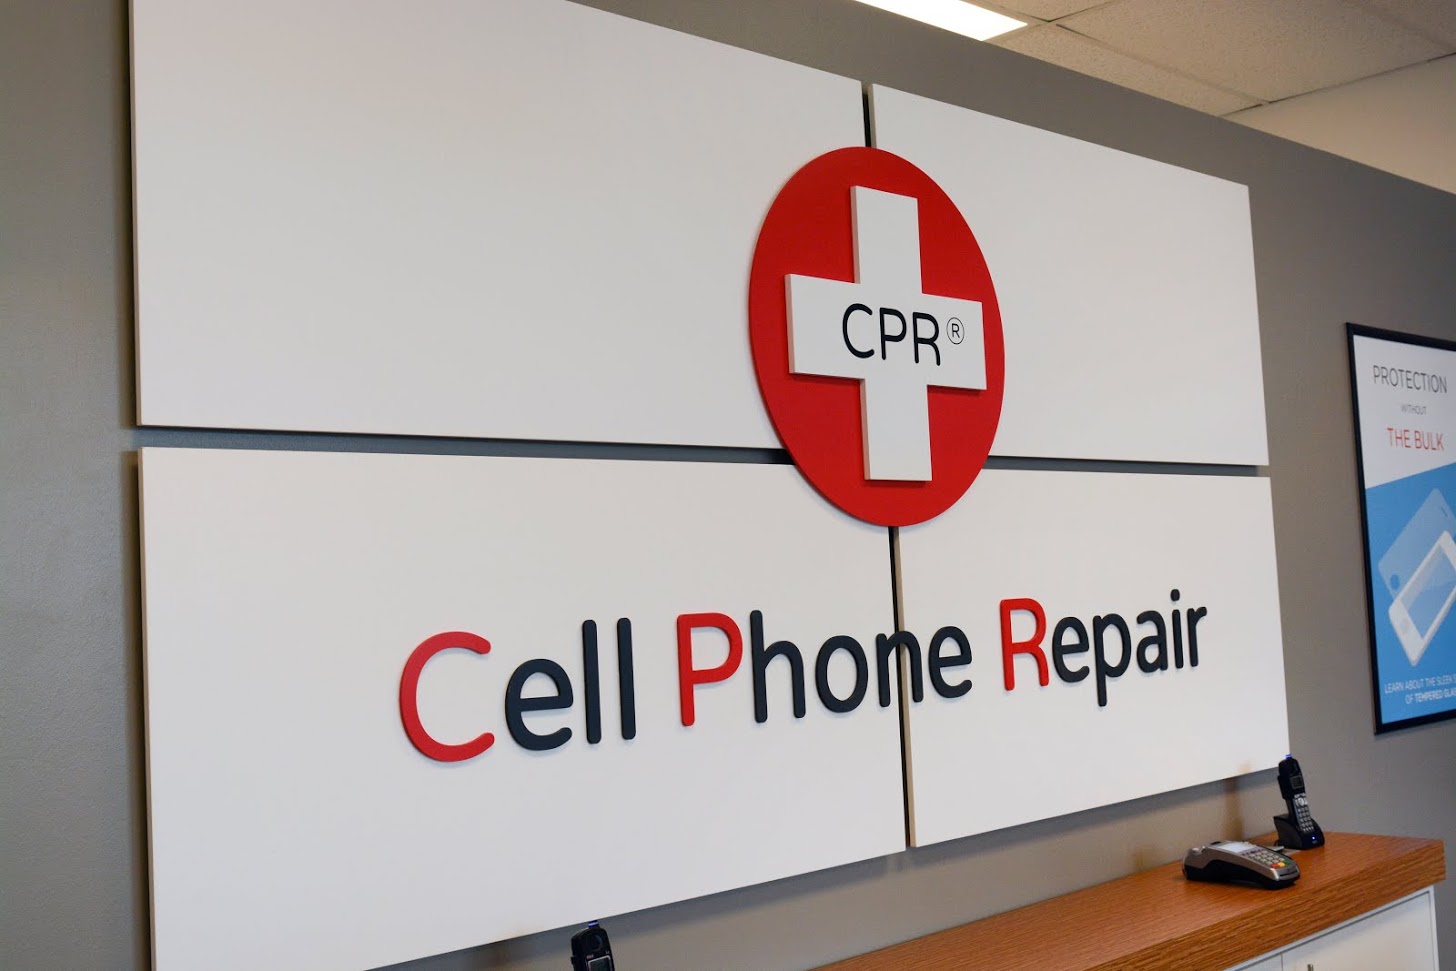 CPR Cell Phone Repair, Tuesday, October 1, 2019, Press release picture